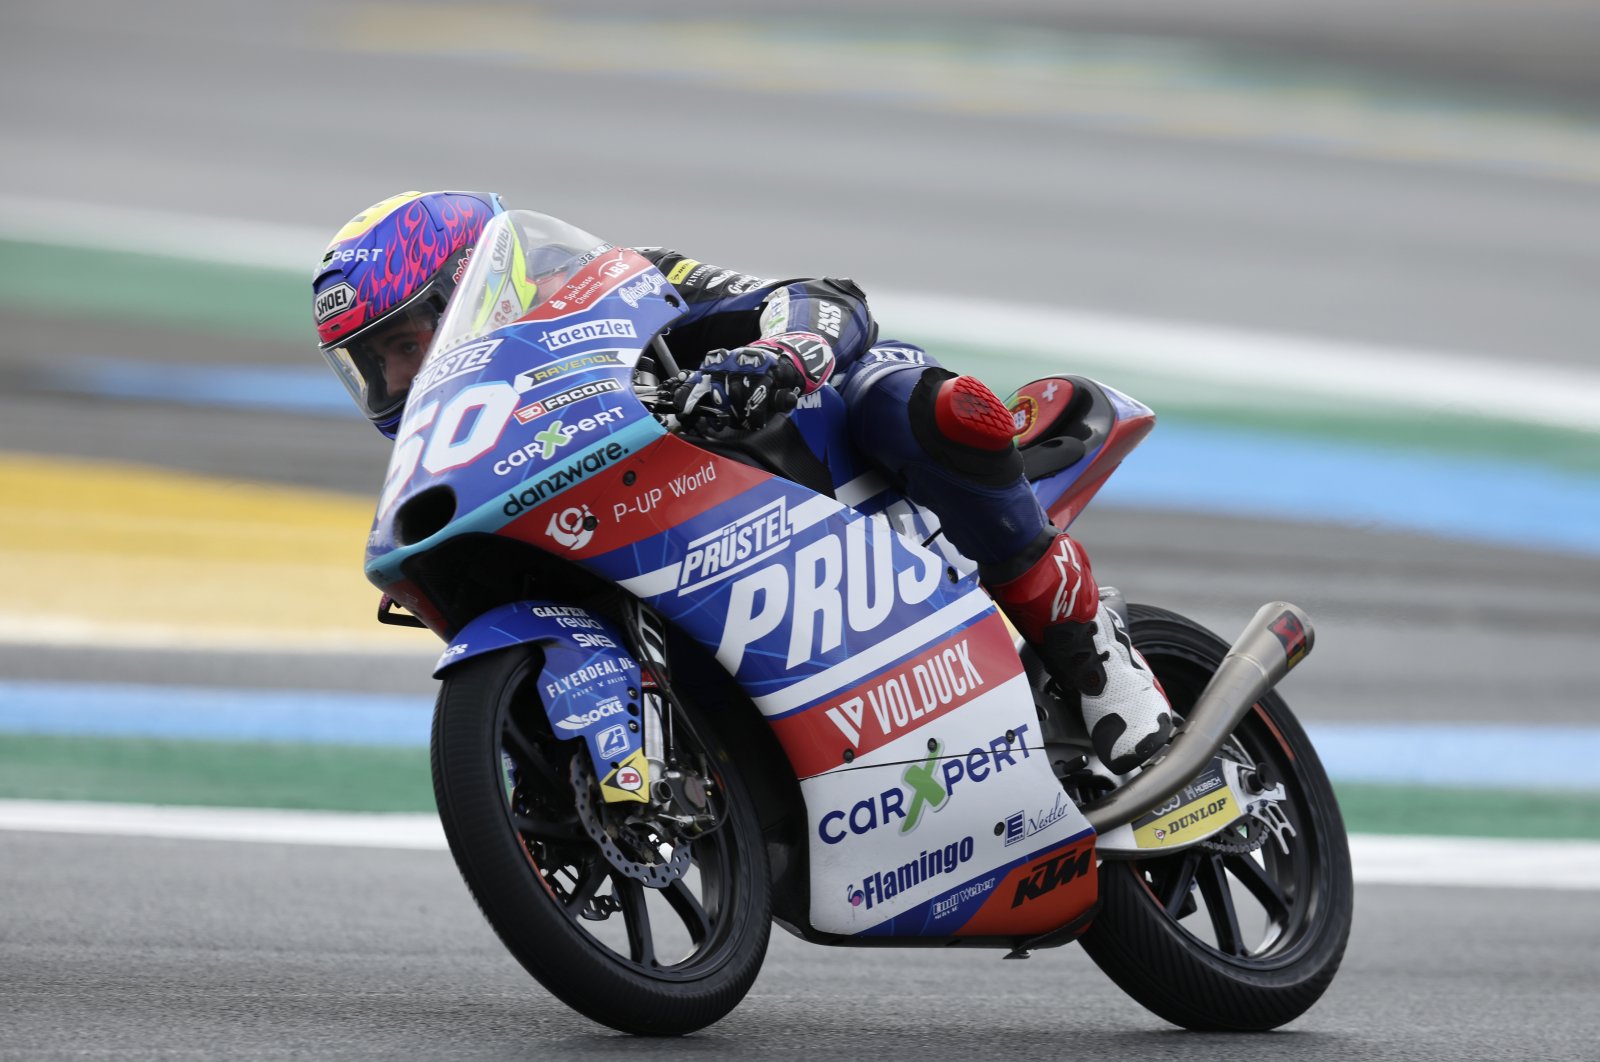 Moto3 rider Jason Dupasquier of Switzerland steers his motorcycle during the French Motorcycle Grand Prix in Le Mans, France, May 16, 2021. (AP Photo)